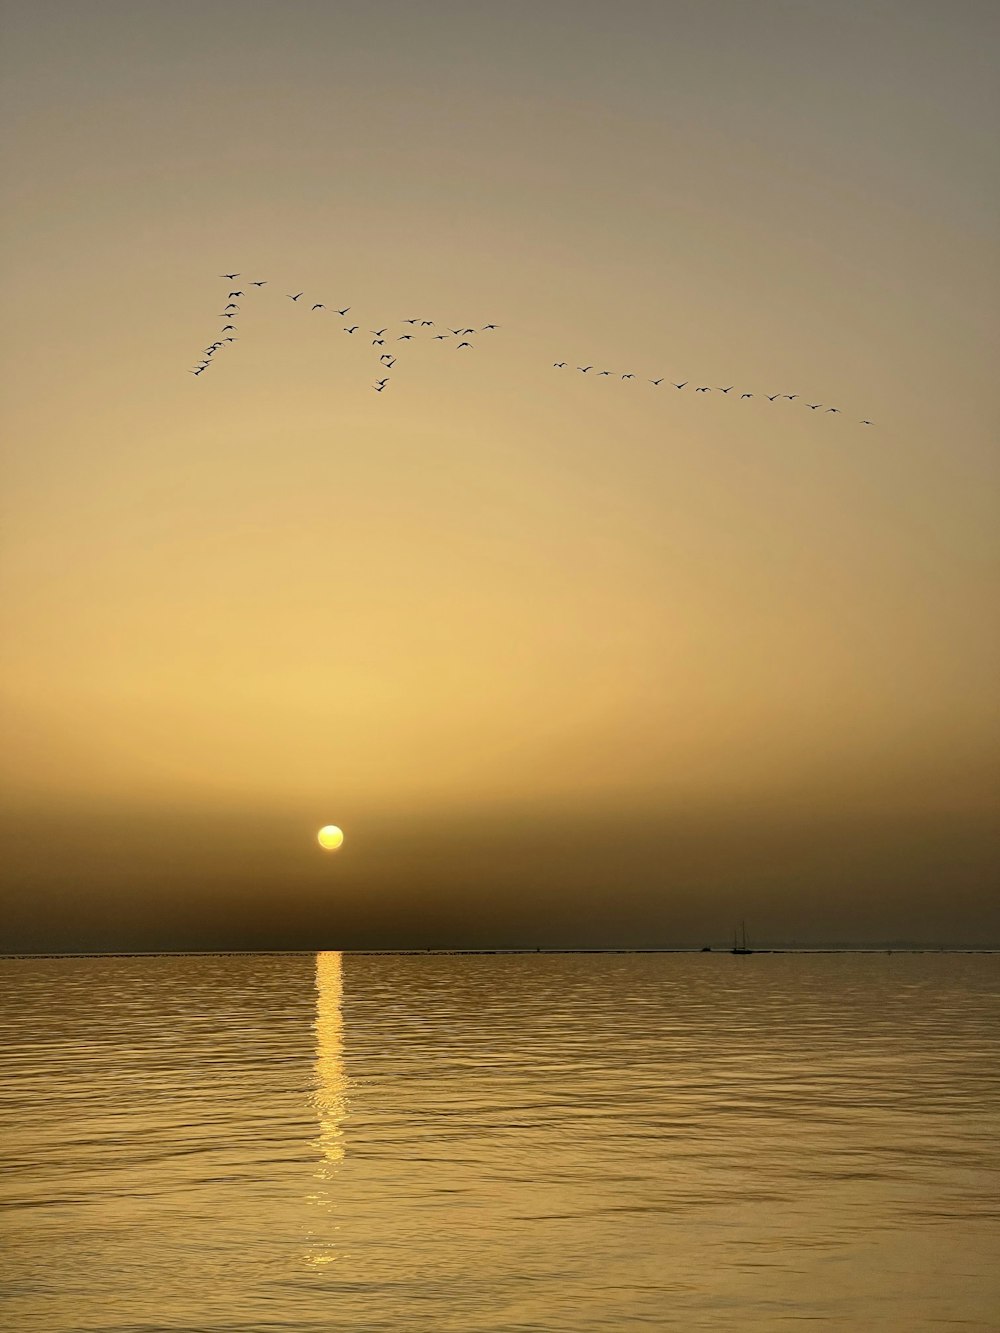 a flock of birds flying over the ocean at sunset